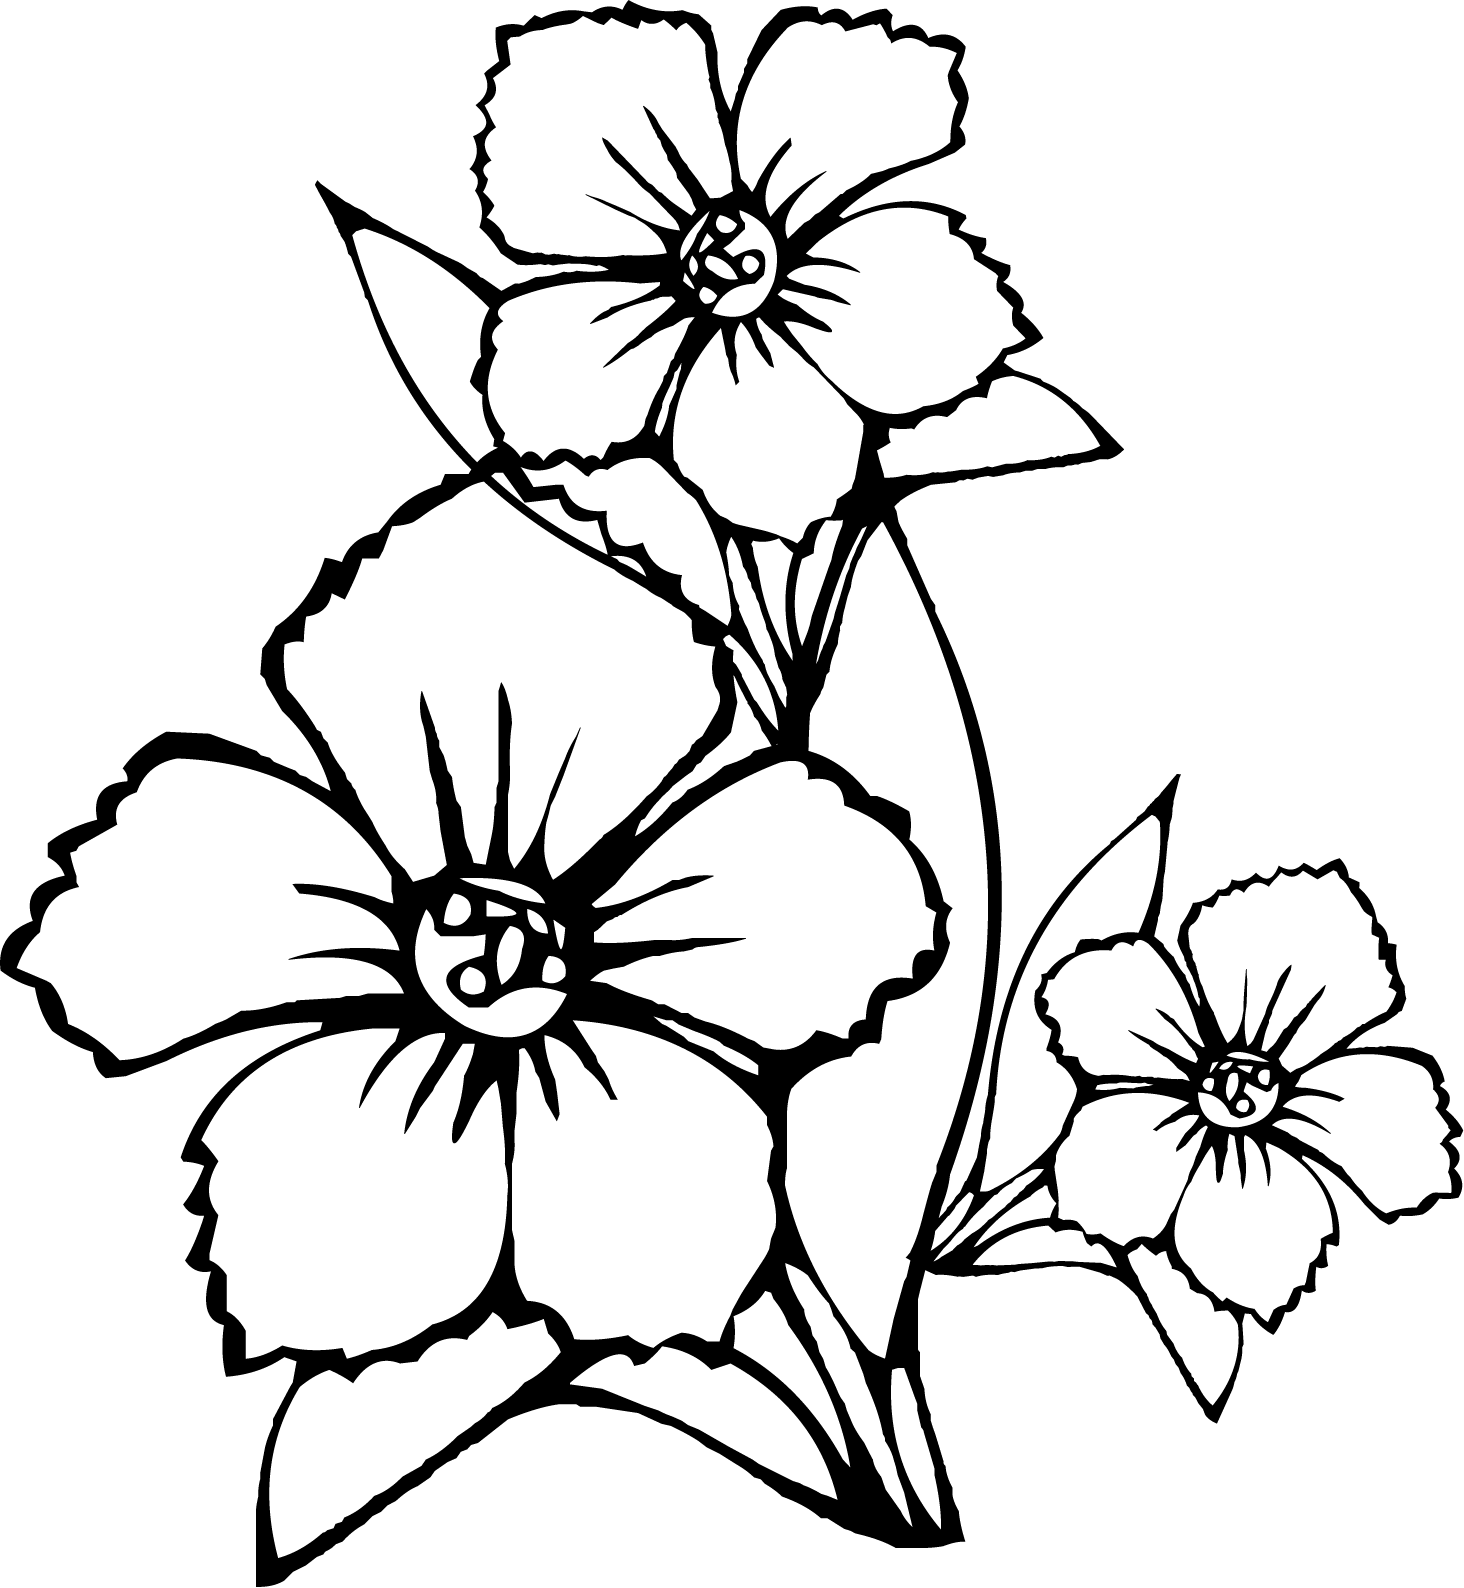 Flowers coloring pages | color printing | Flower | Coloring pages free | #2